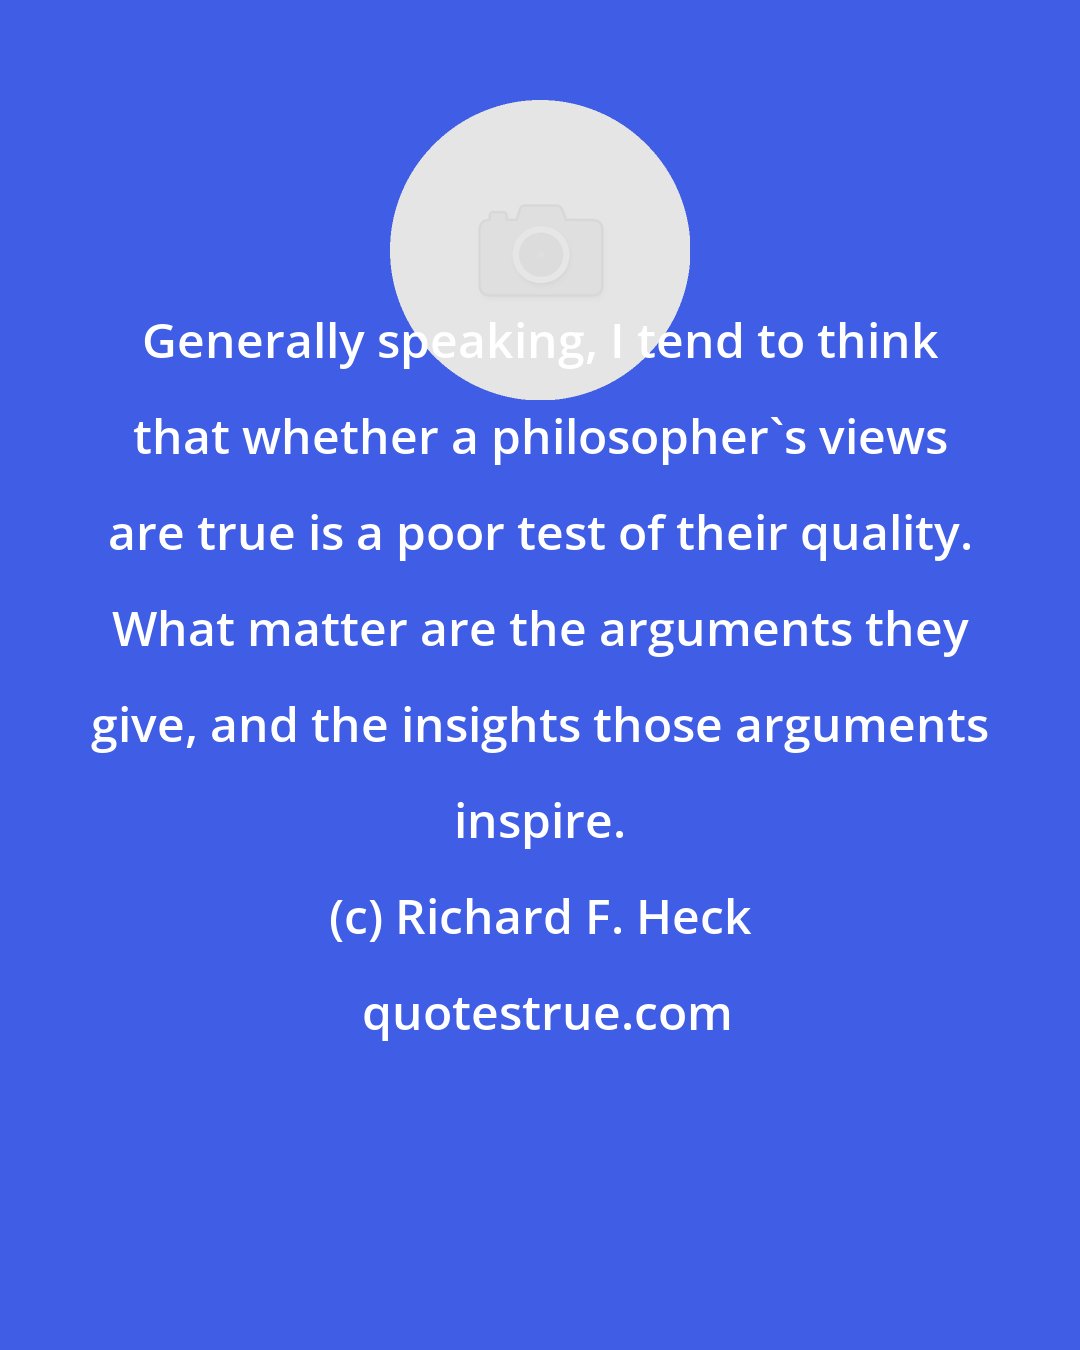 Richard F. Heck: Generally speaking, I tend to think that whether a philosopher's views are true is a poor test of their quality. What matter are the arguments they give, and the insights those arguments inspire.